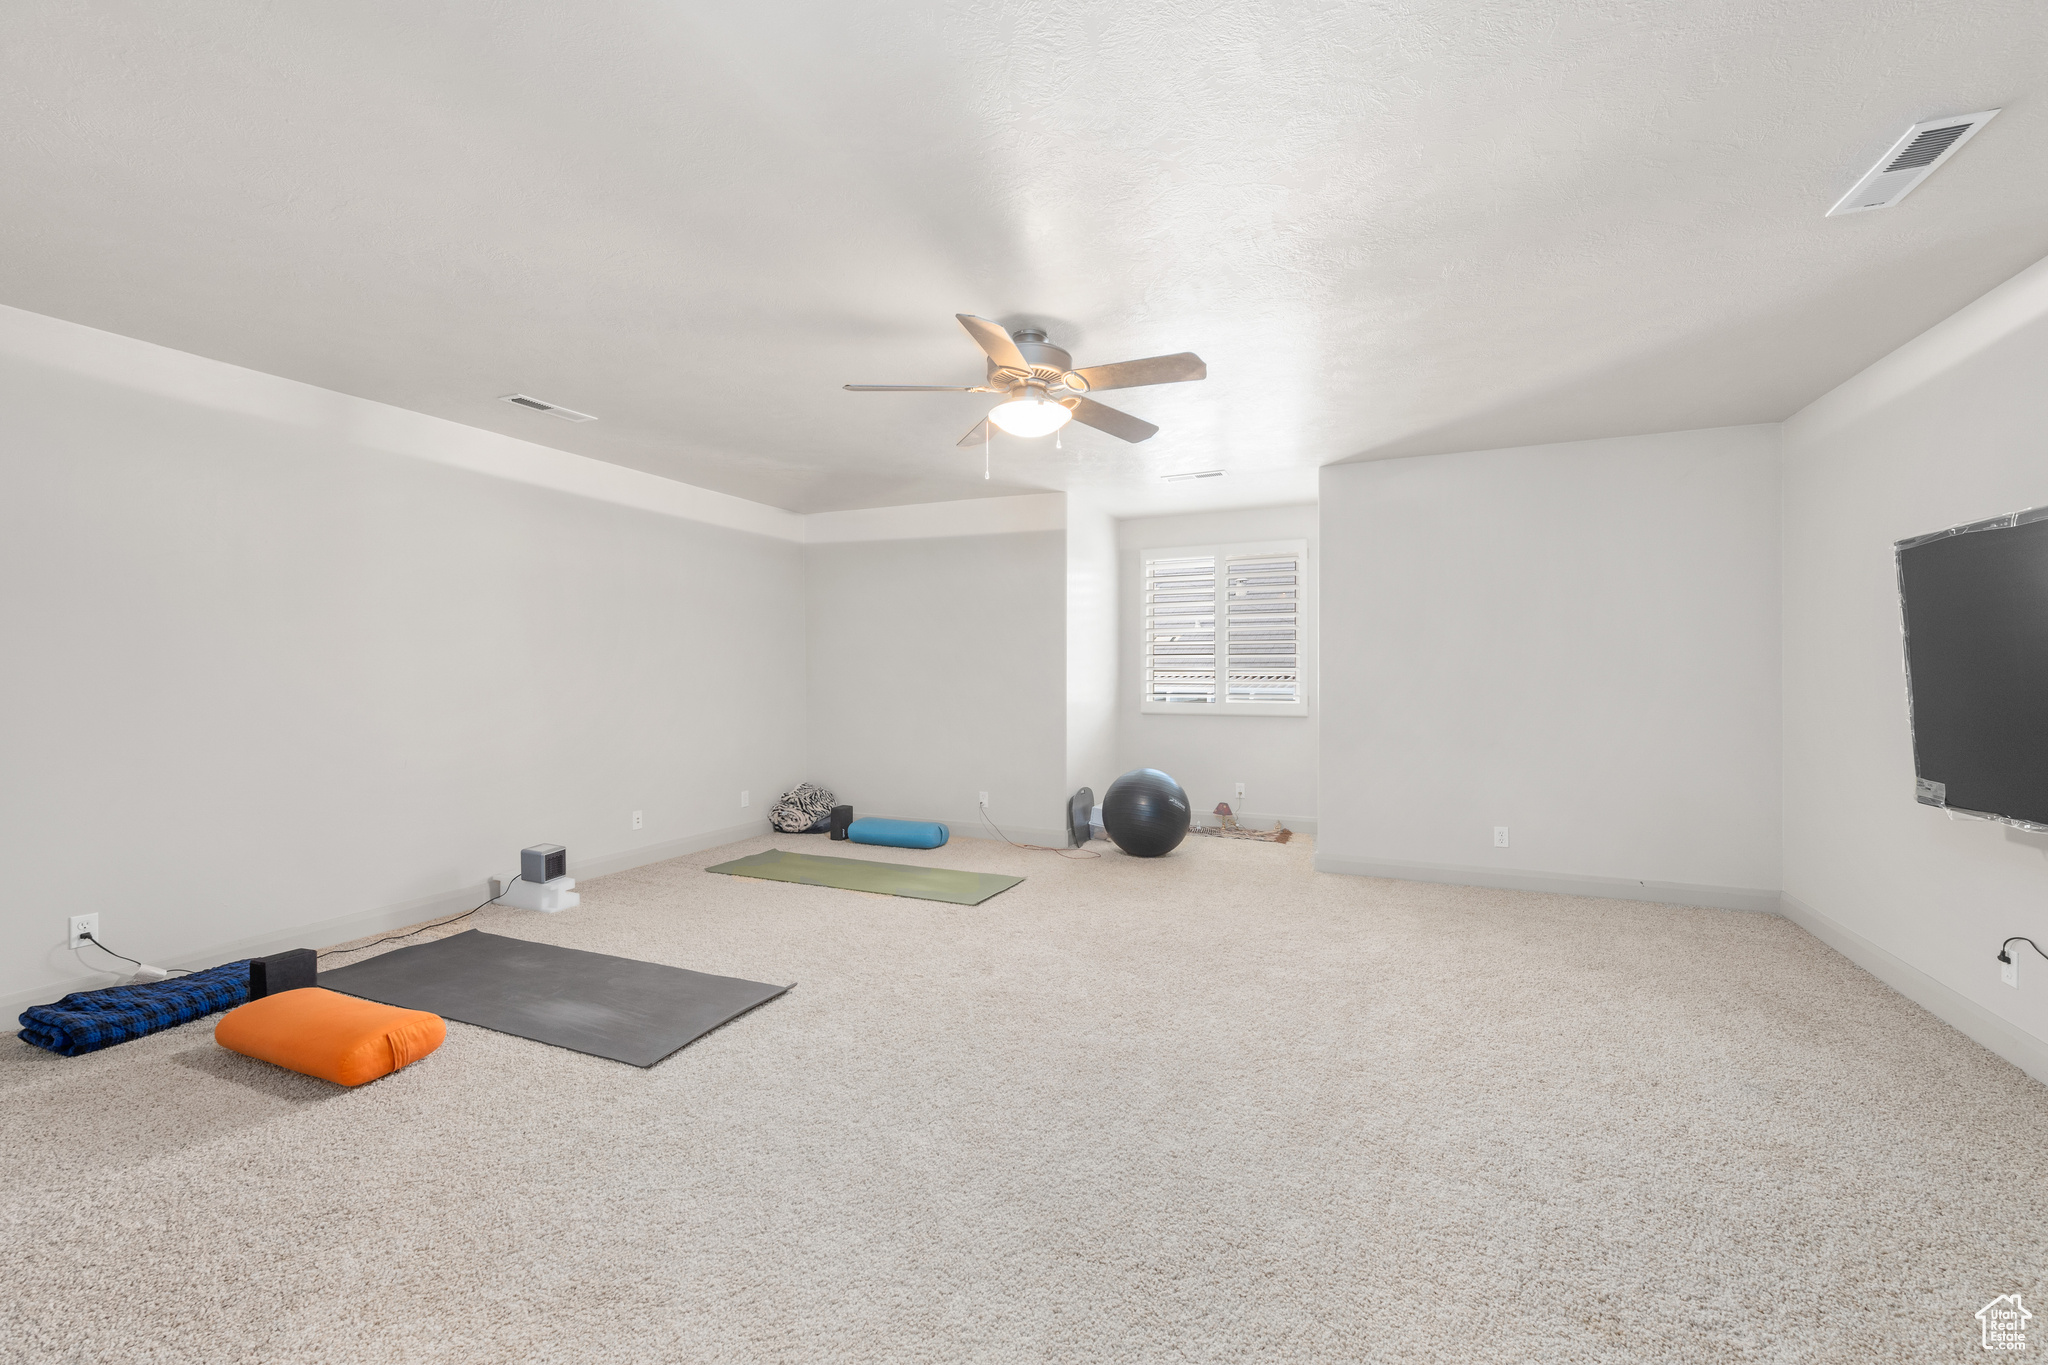 Workout room featuring carpet floors and ceiling fan